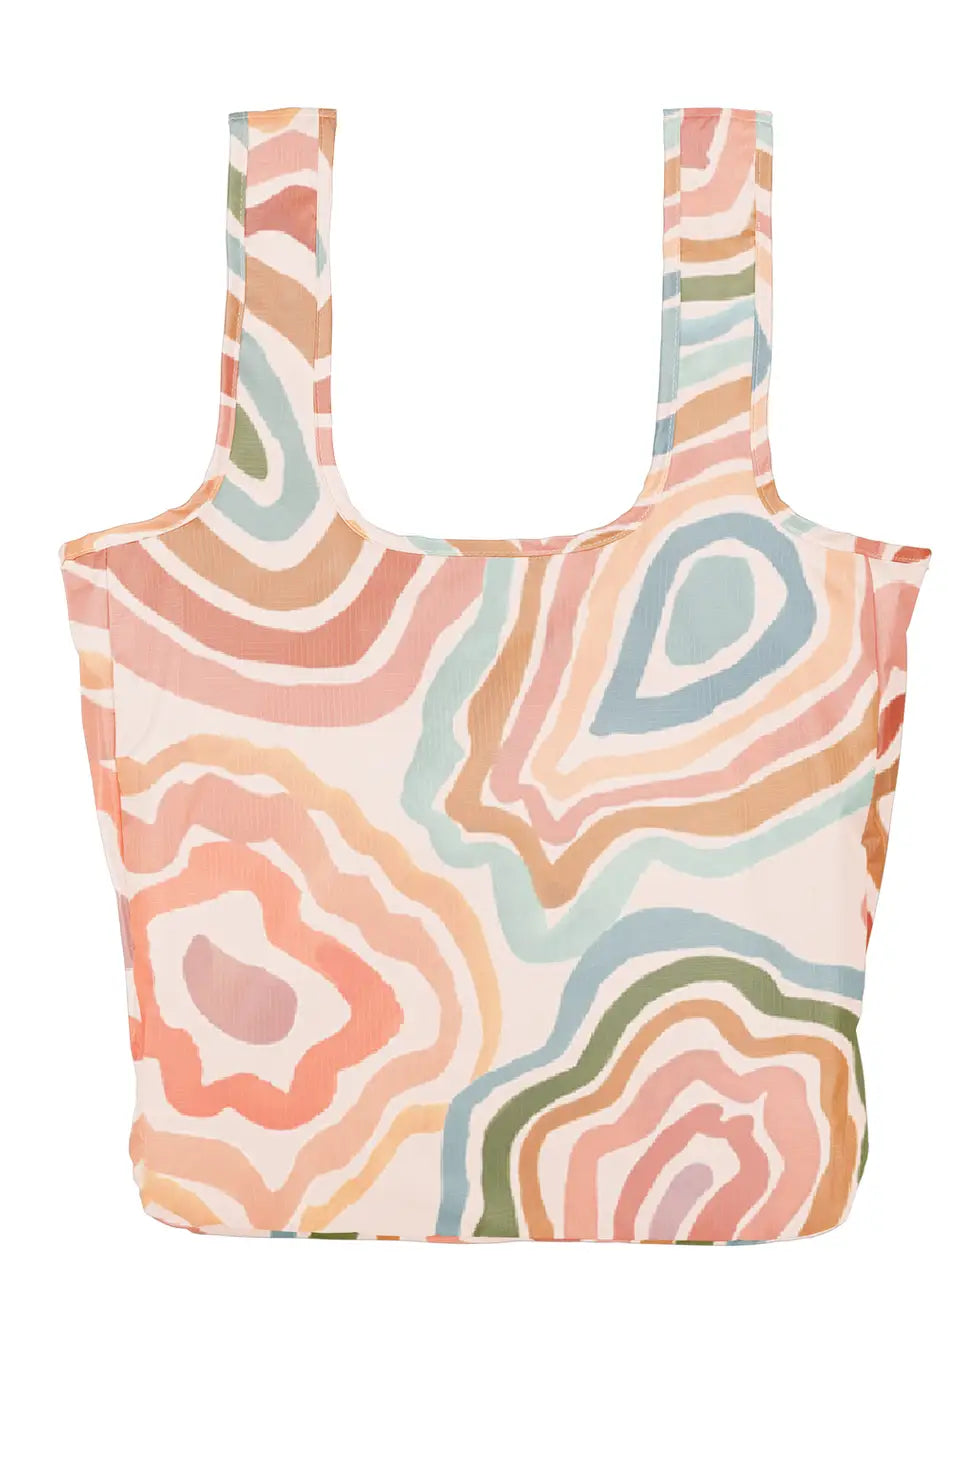 twist & shout large tote bag squiggles talking out of turn apex ethical womens boutique